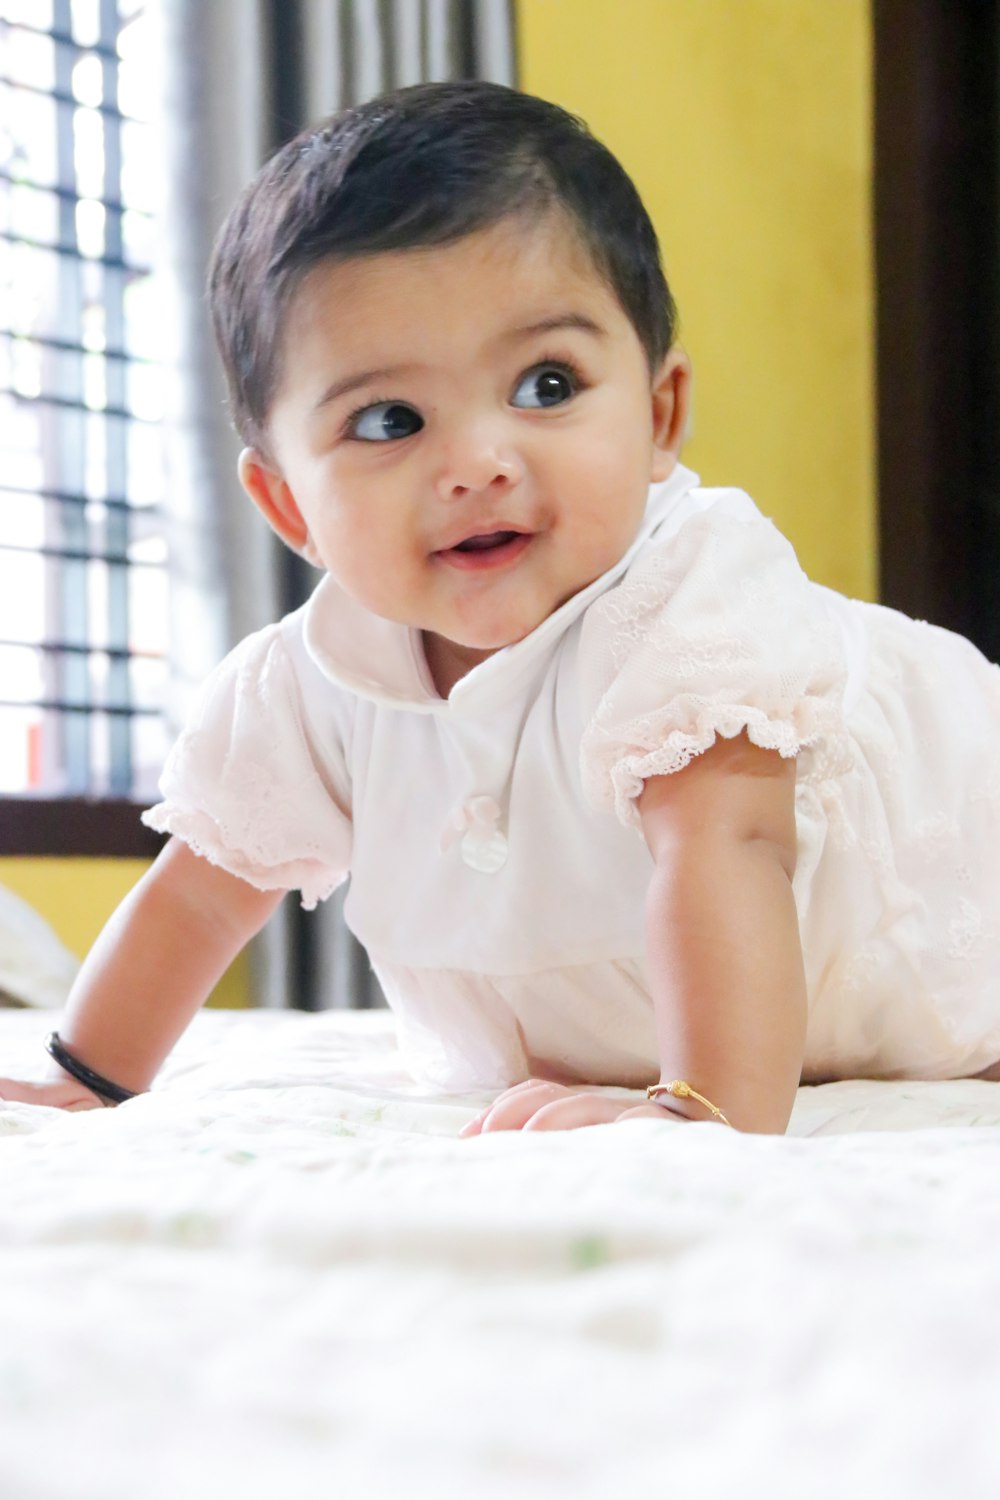 Full 4K Collection of Amazing Sweet Baby Girl Images – Top 999+